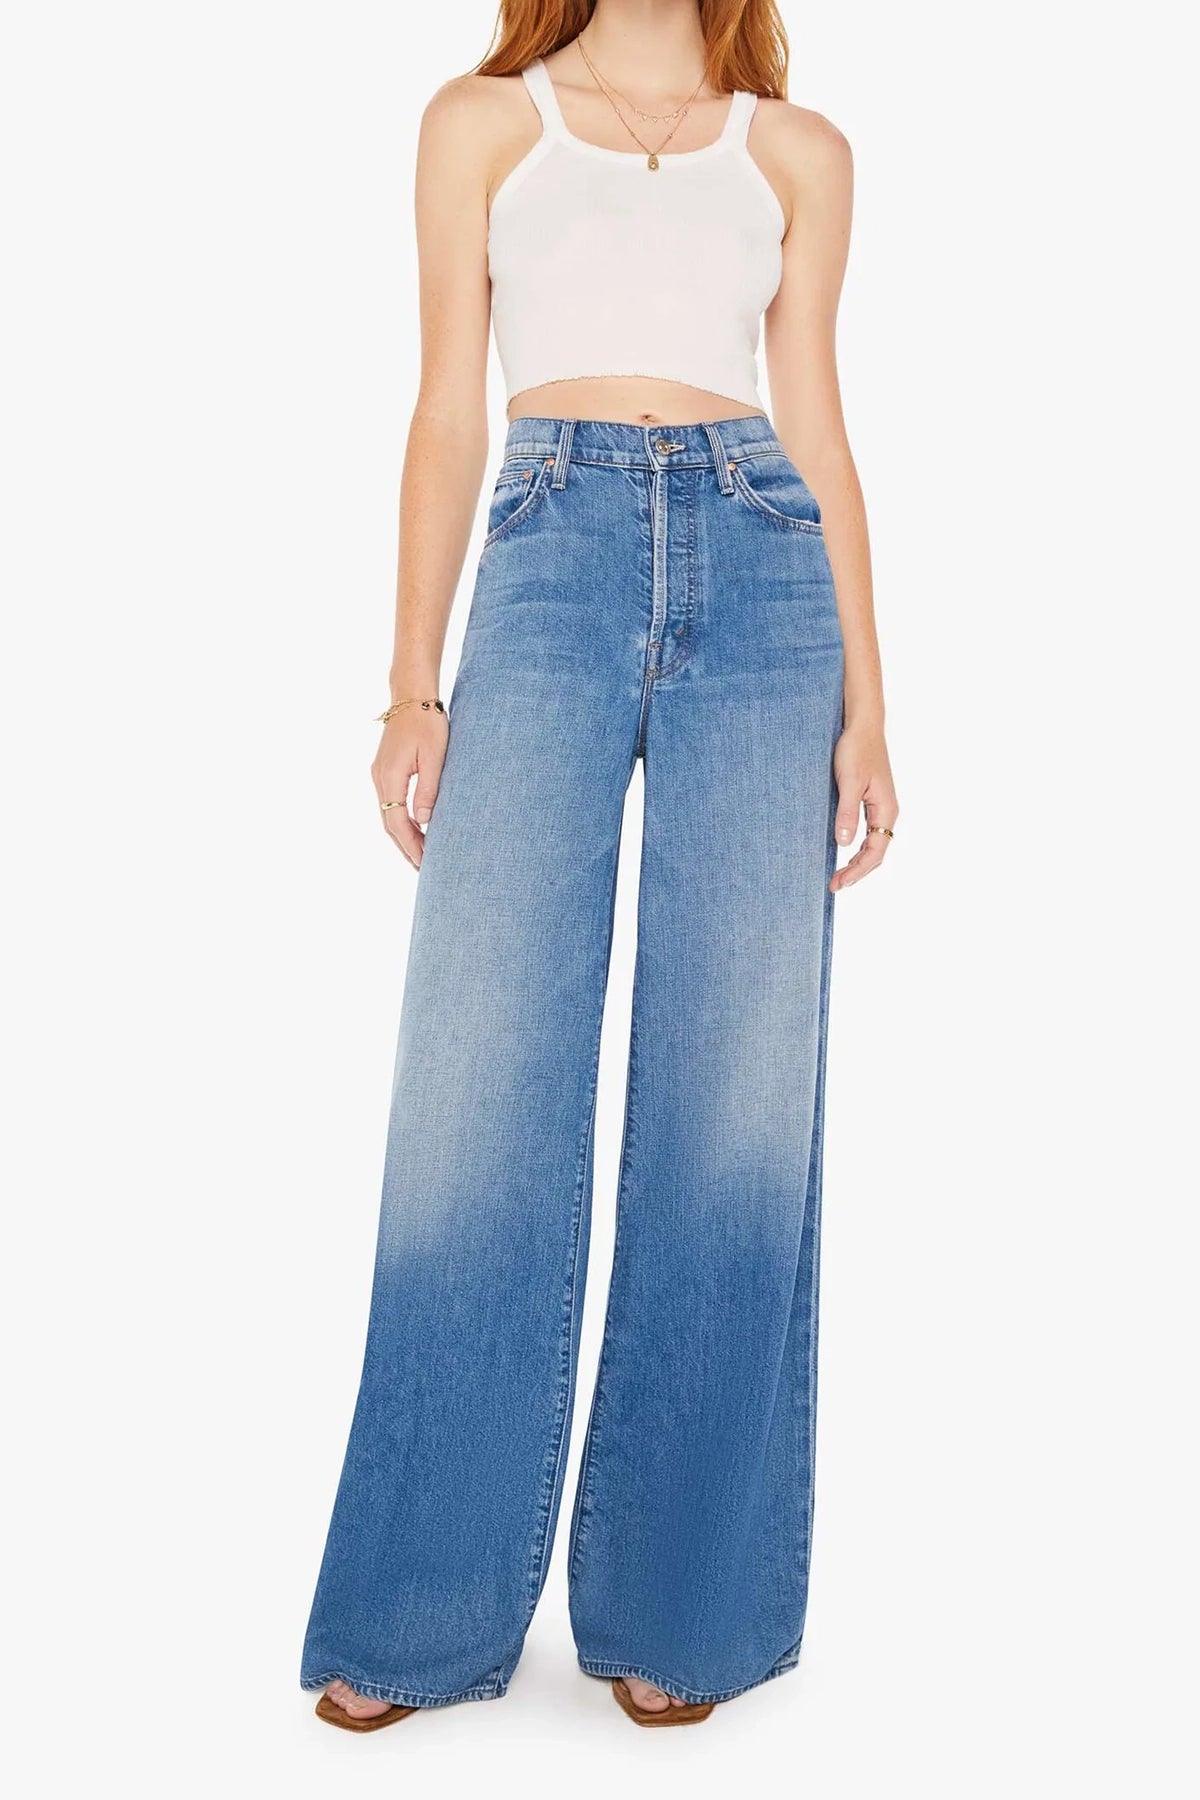 Mother The Ditcher Roller Sneak Jeans